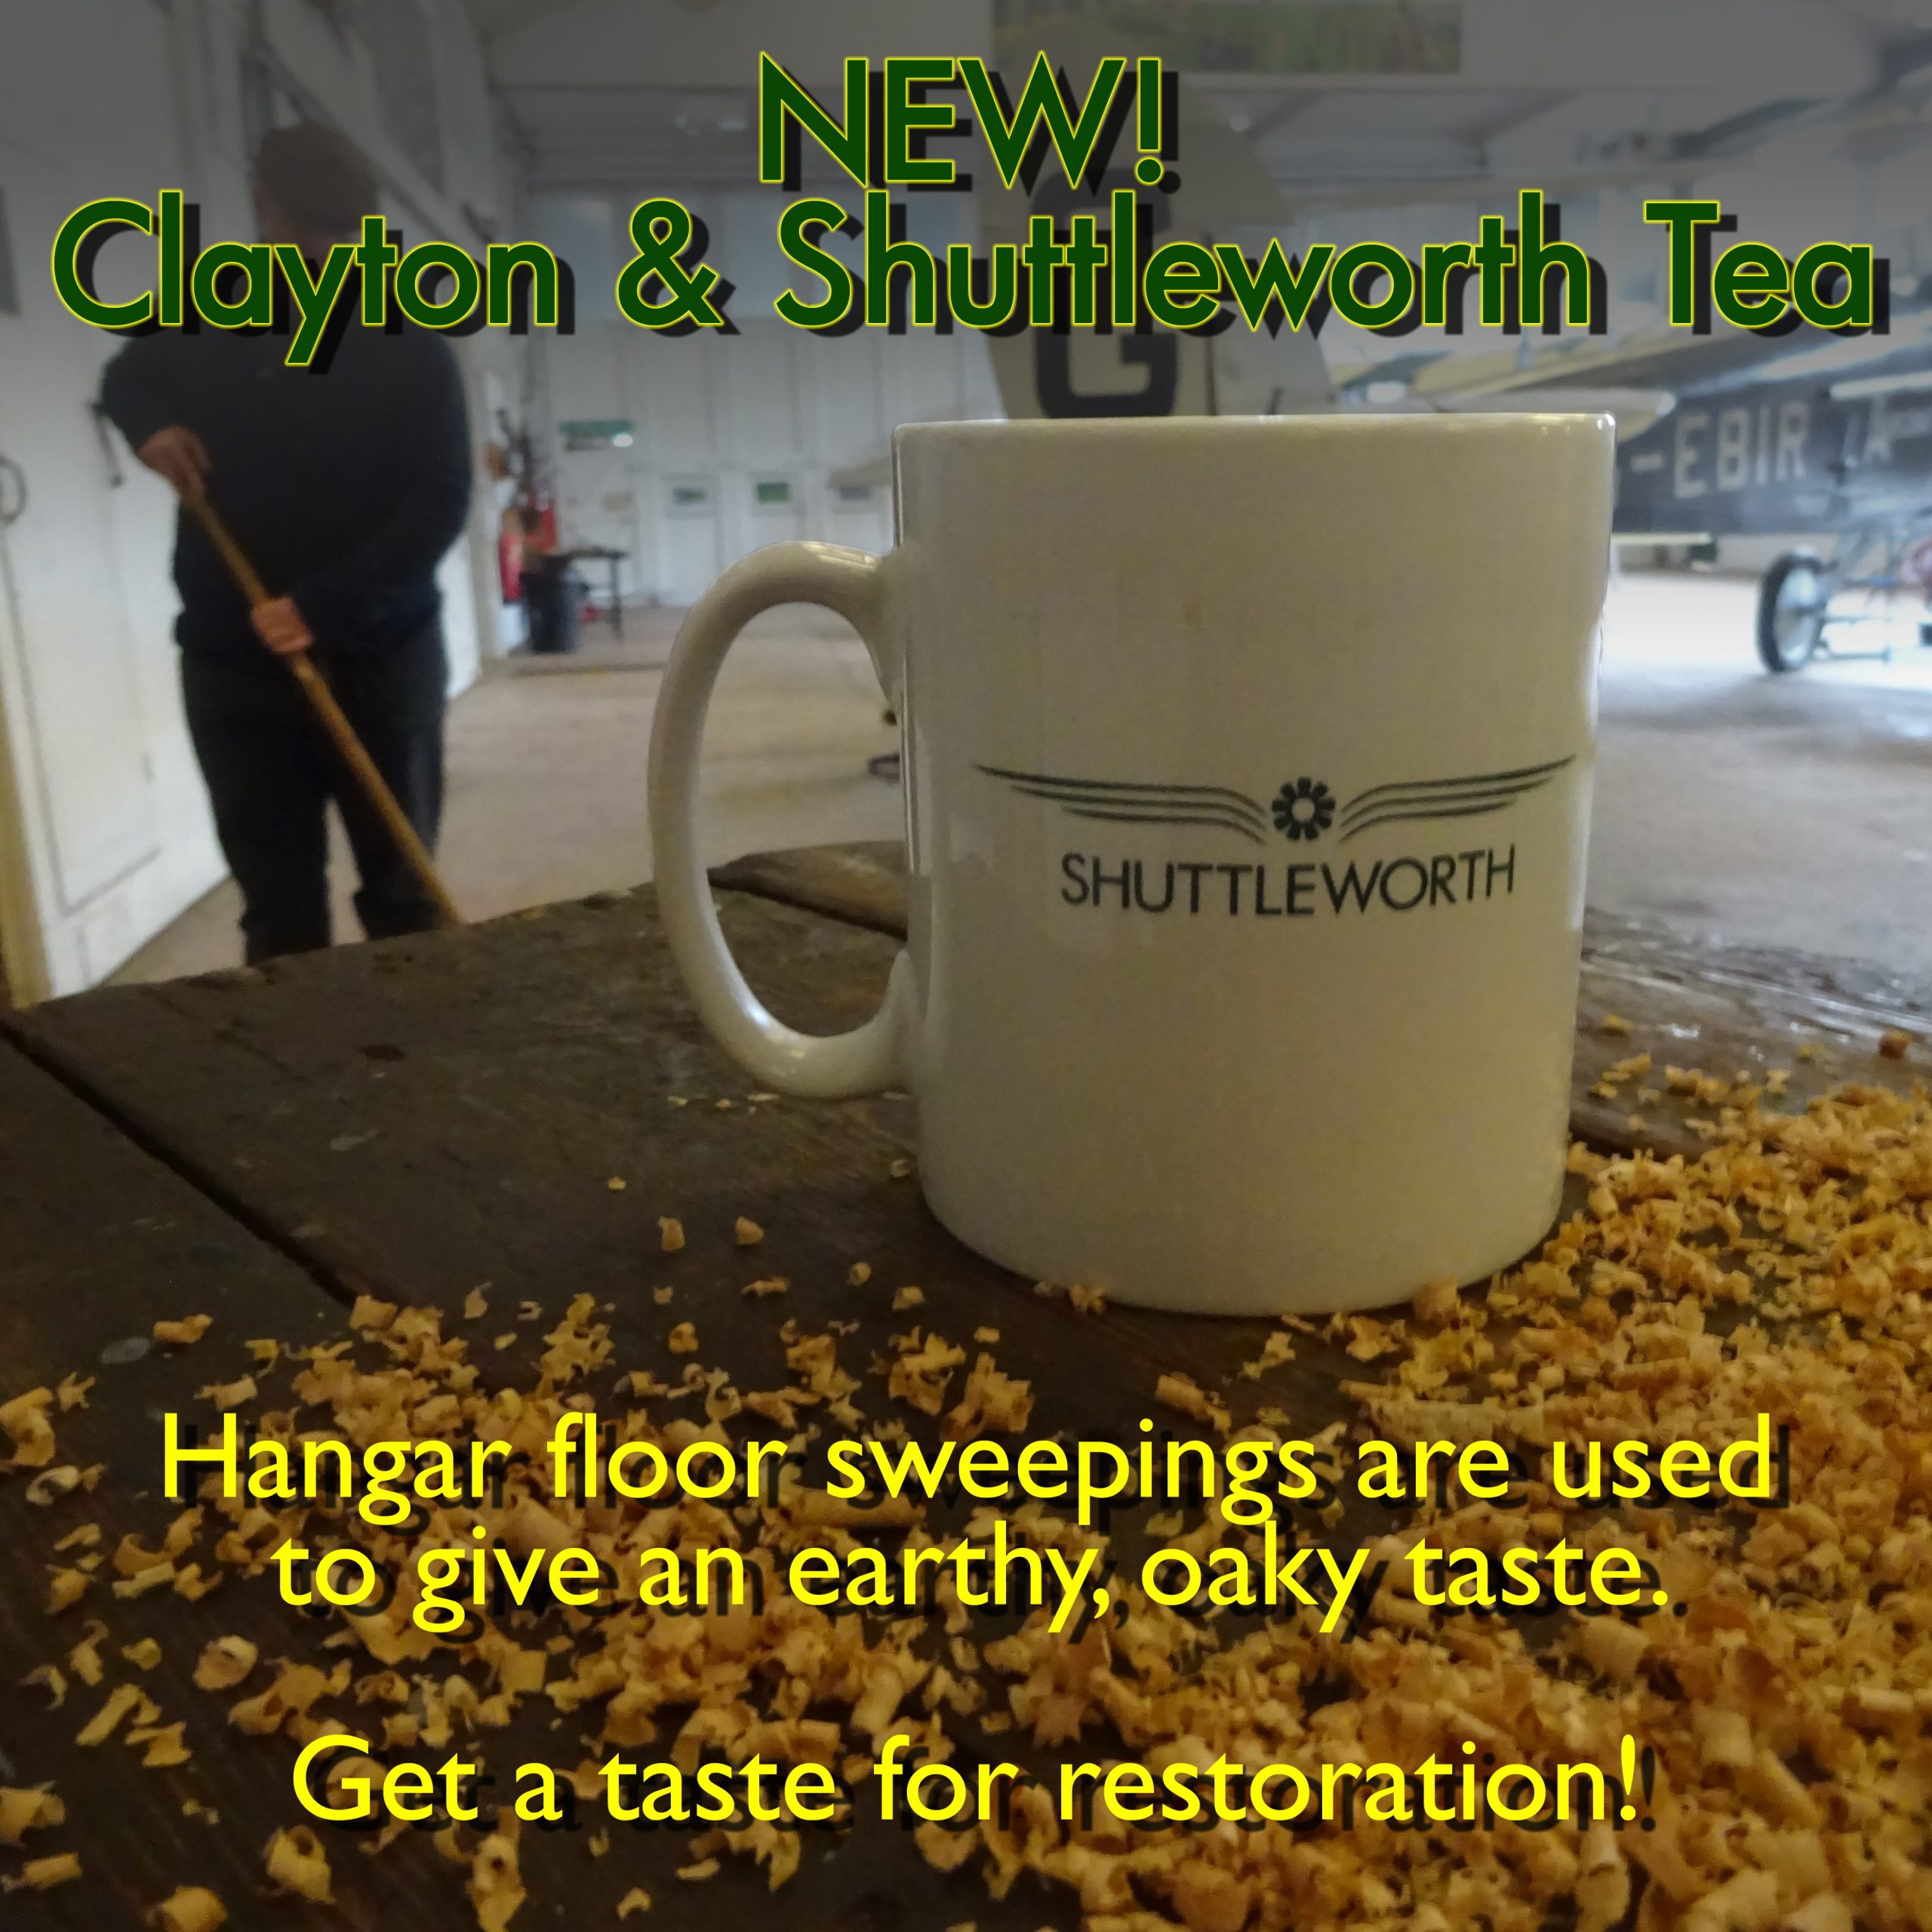 Thumbnail for the post titled: New! Clayton & Shuttleworth Tea